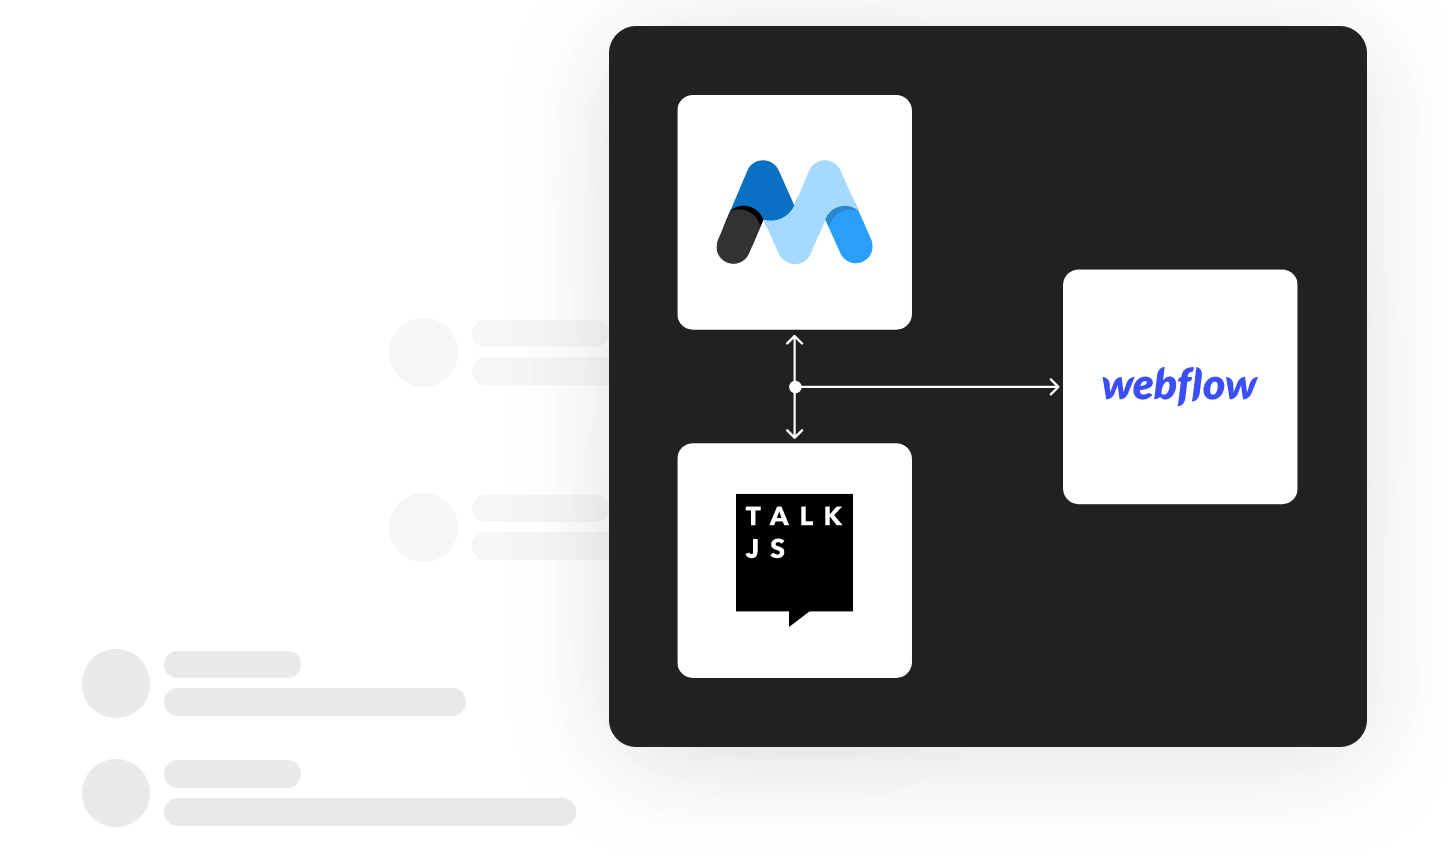 Diagram with the logos of Memberstack, TalkJS and Webflow. One arrow connects TalkJS and Memberstack, and another arrow connects the pair of these to Webflow.